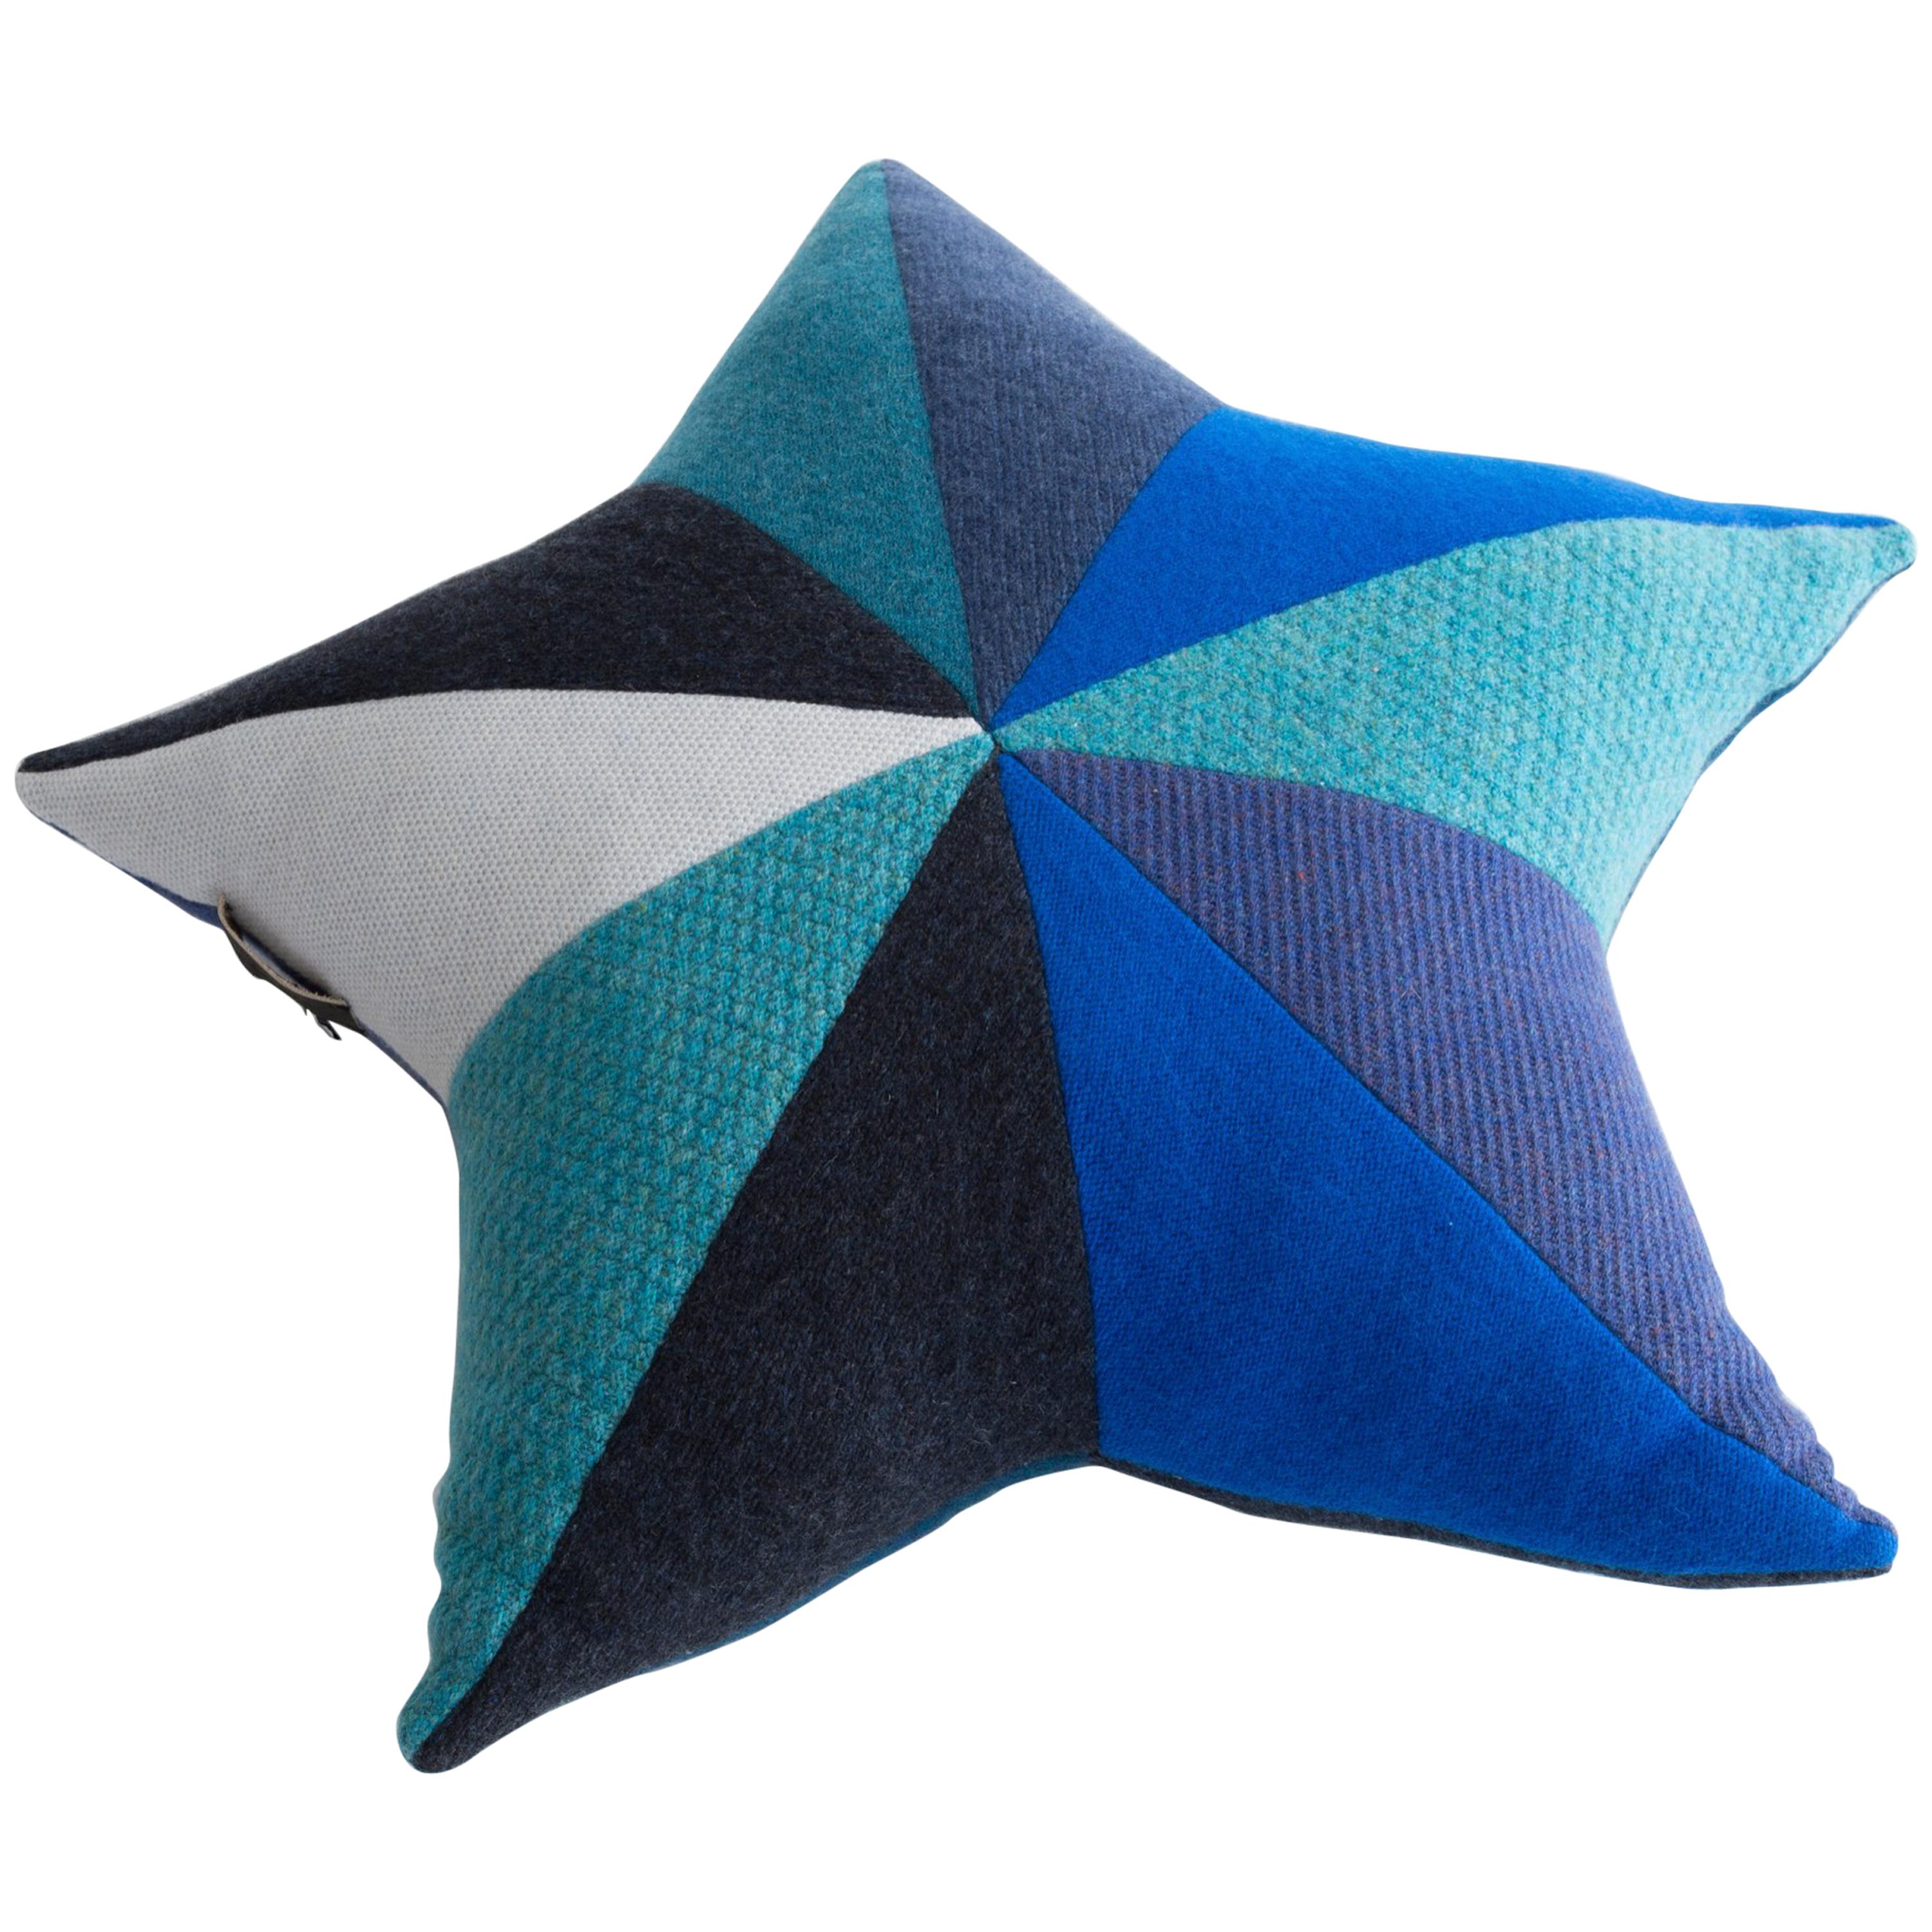 Star-Shaped Patchwordk Pillow in Blue Cashmere by Greg Chait, 2017